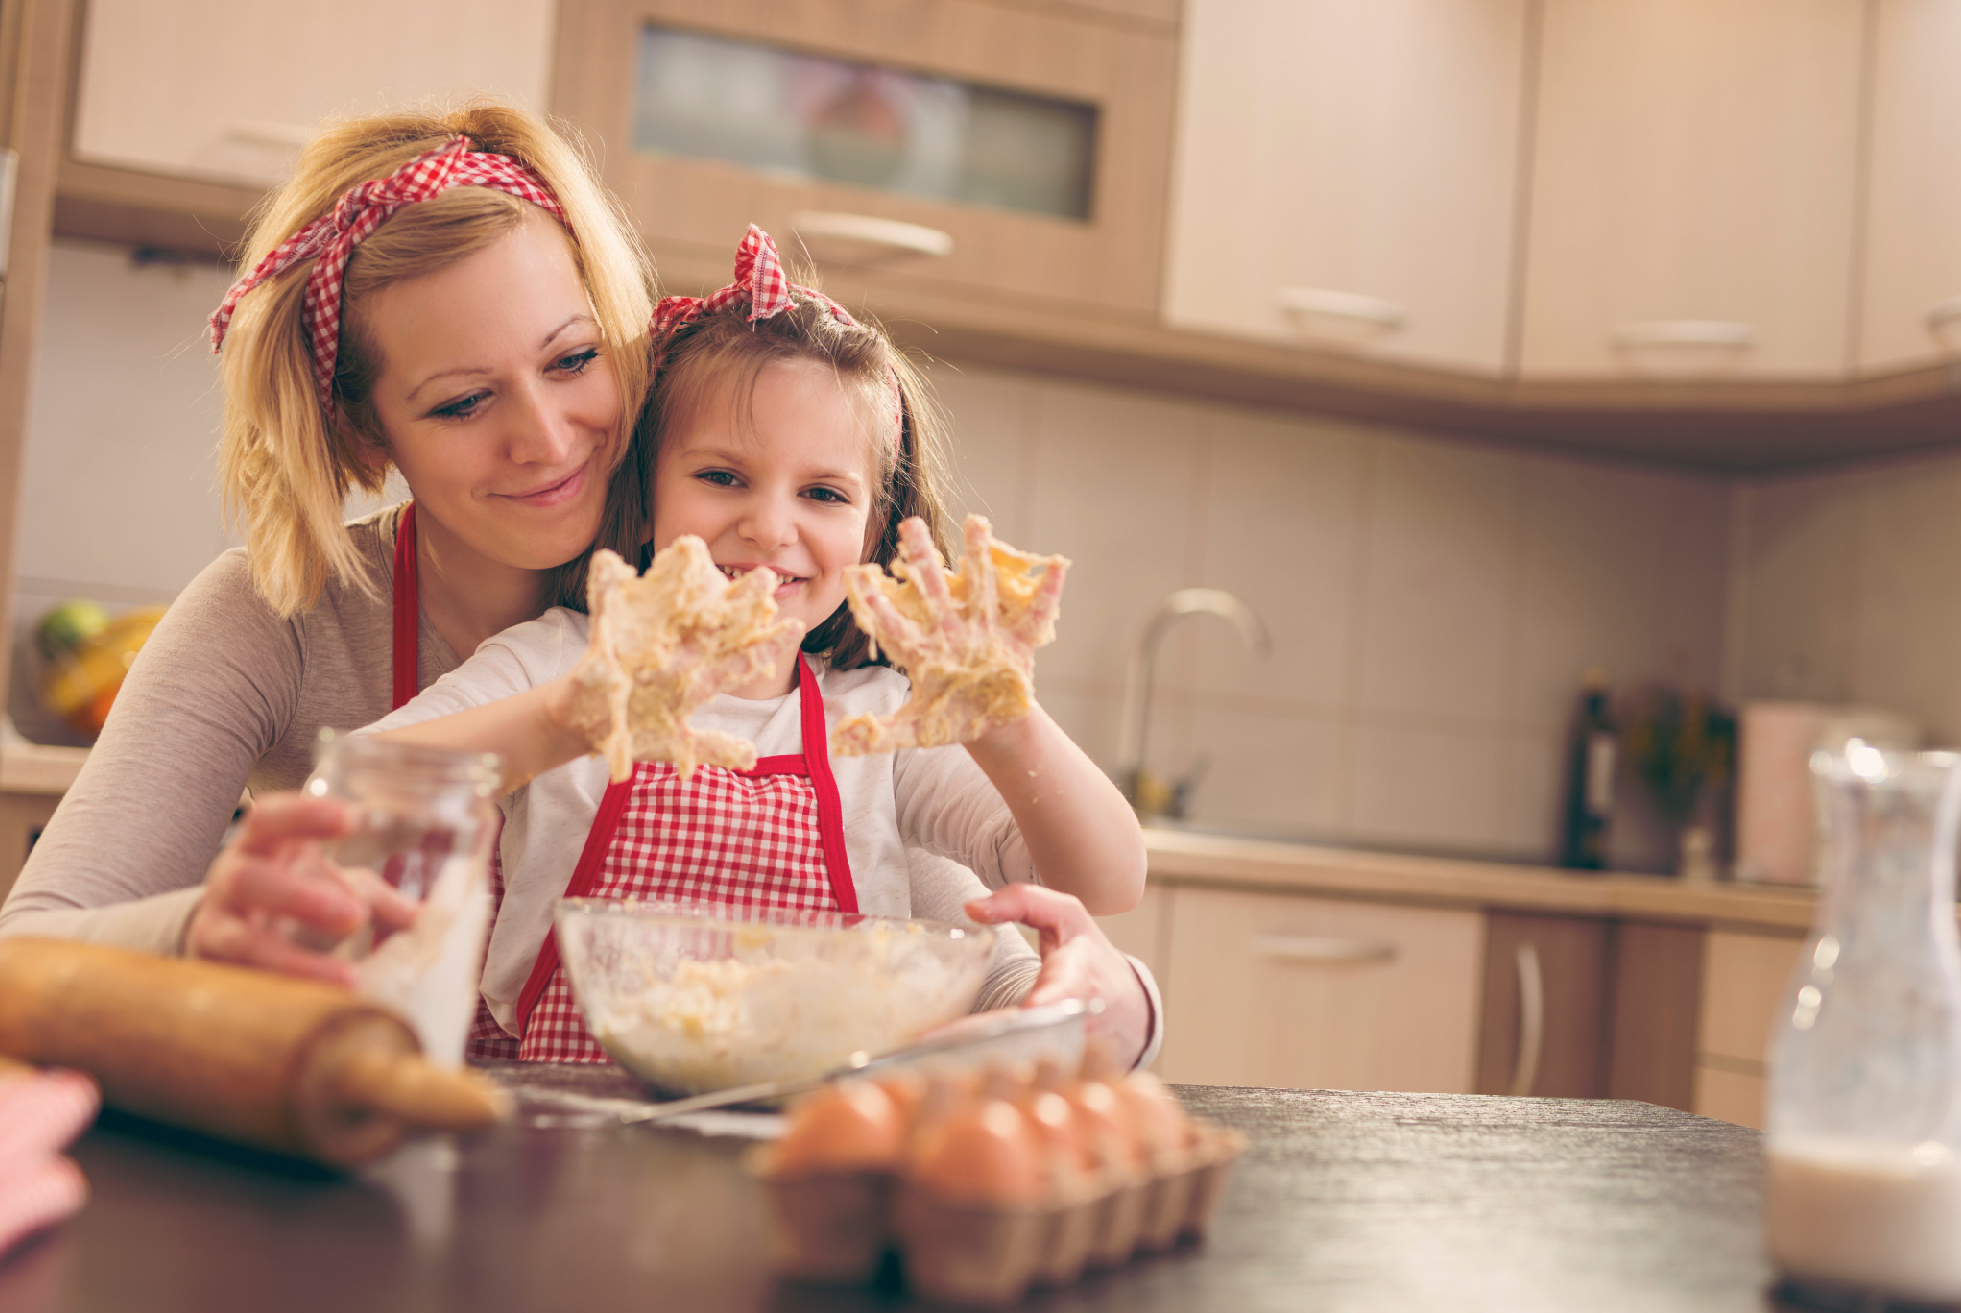 young girl and mom laughing at the little girl's messy hands while they bake food